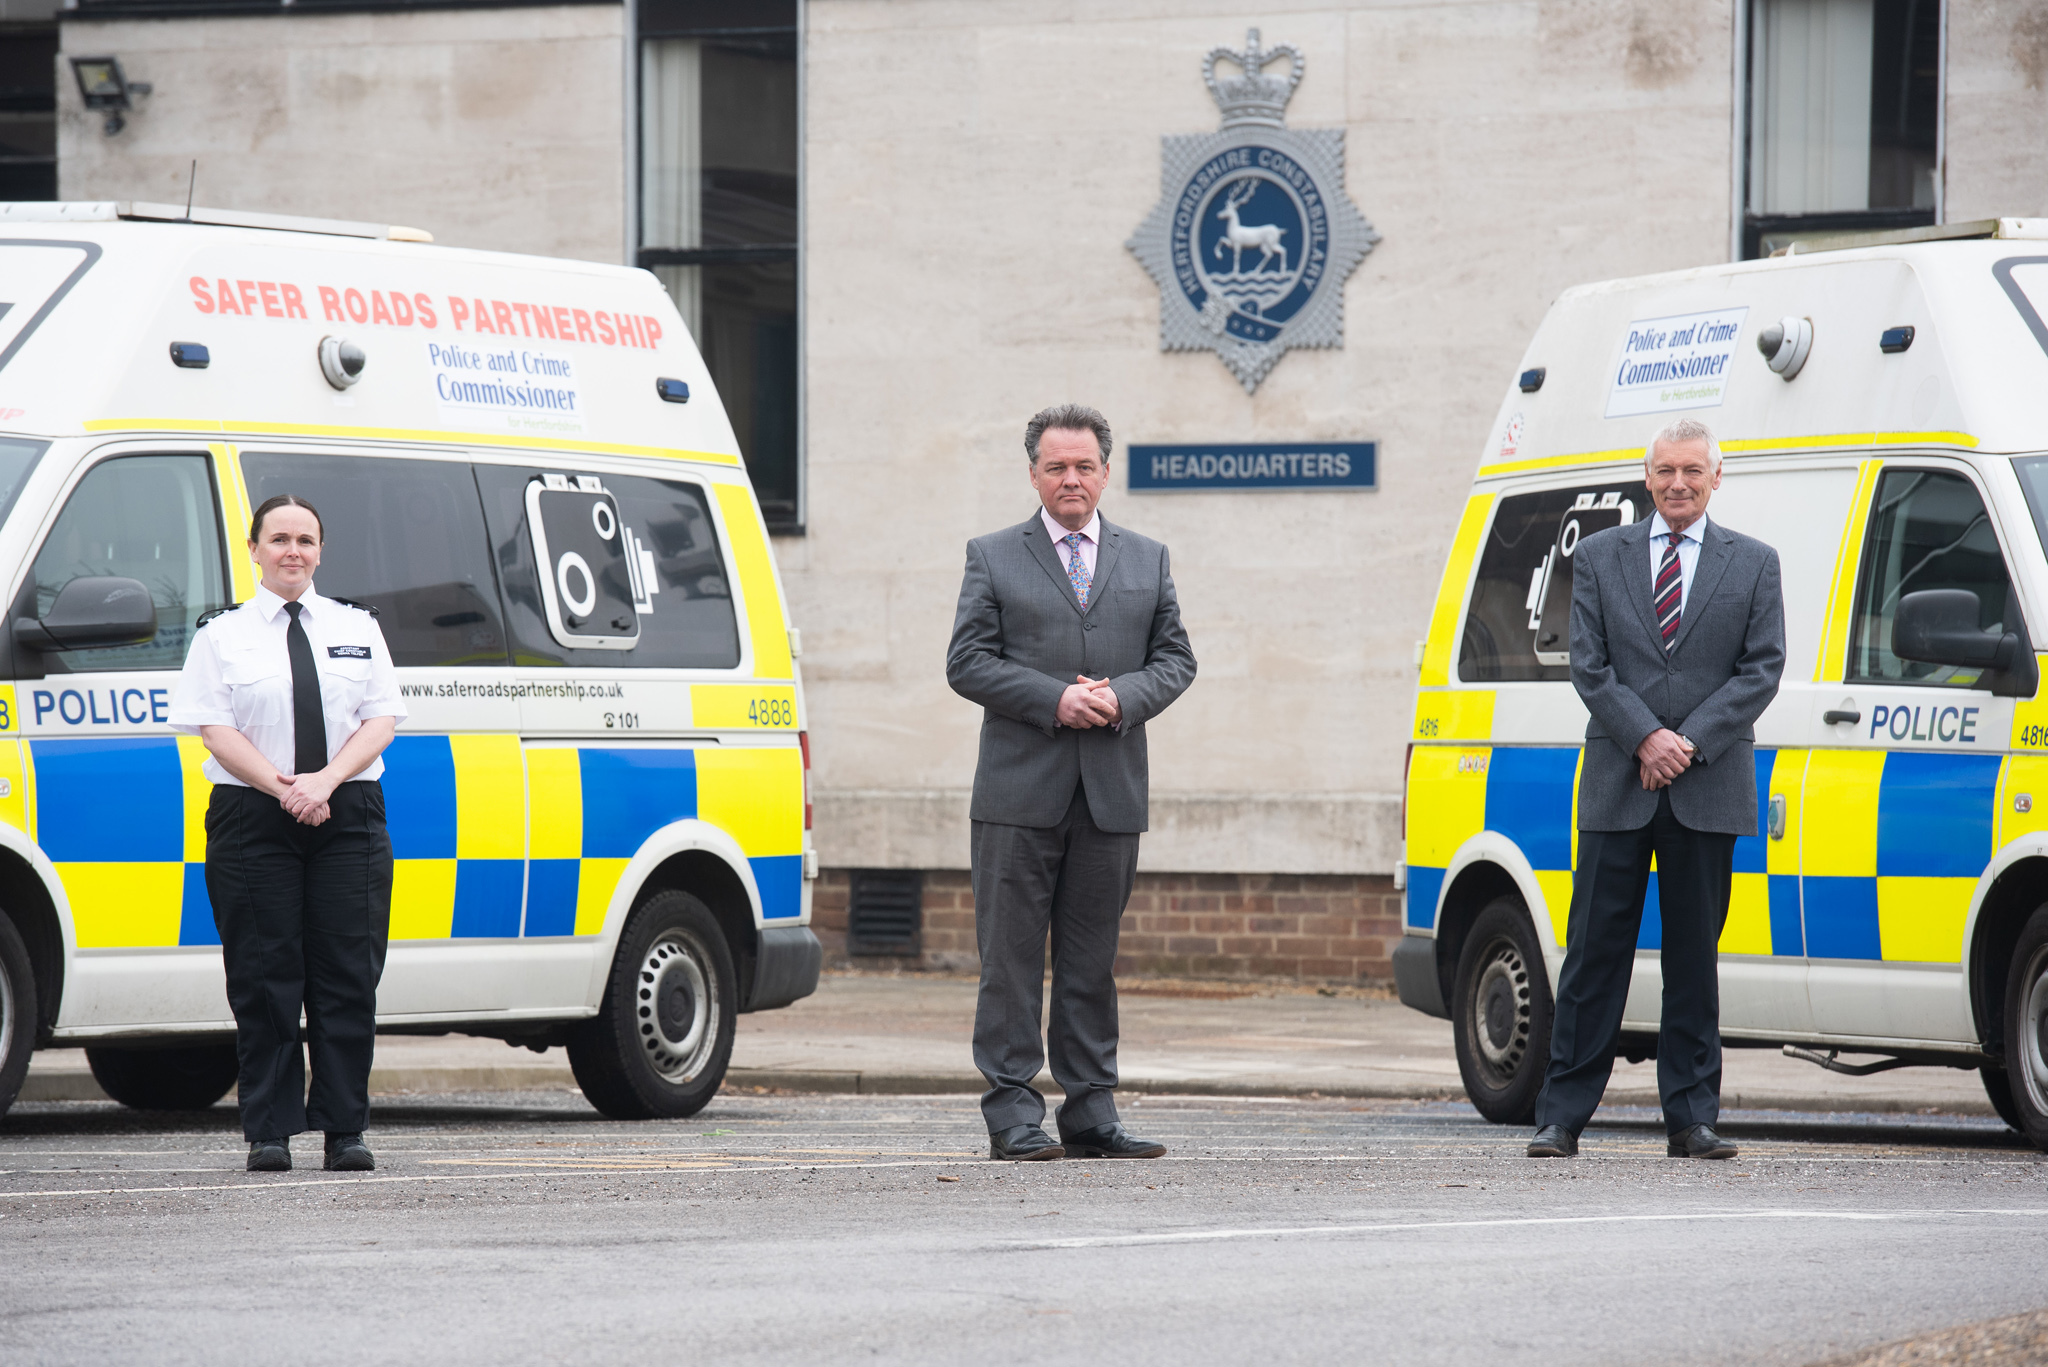 left to right: Assistant chief constable Gemma Telfer, David Lloyd, and Cllr Phil Bibby, cabinet member for highways at Hertfordshire County Council. Photo taken in March